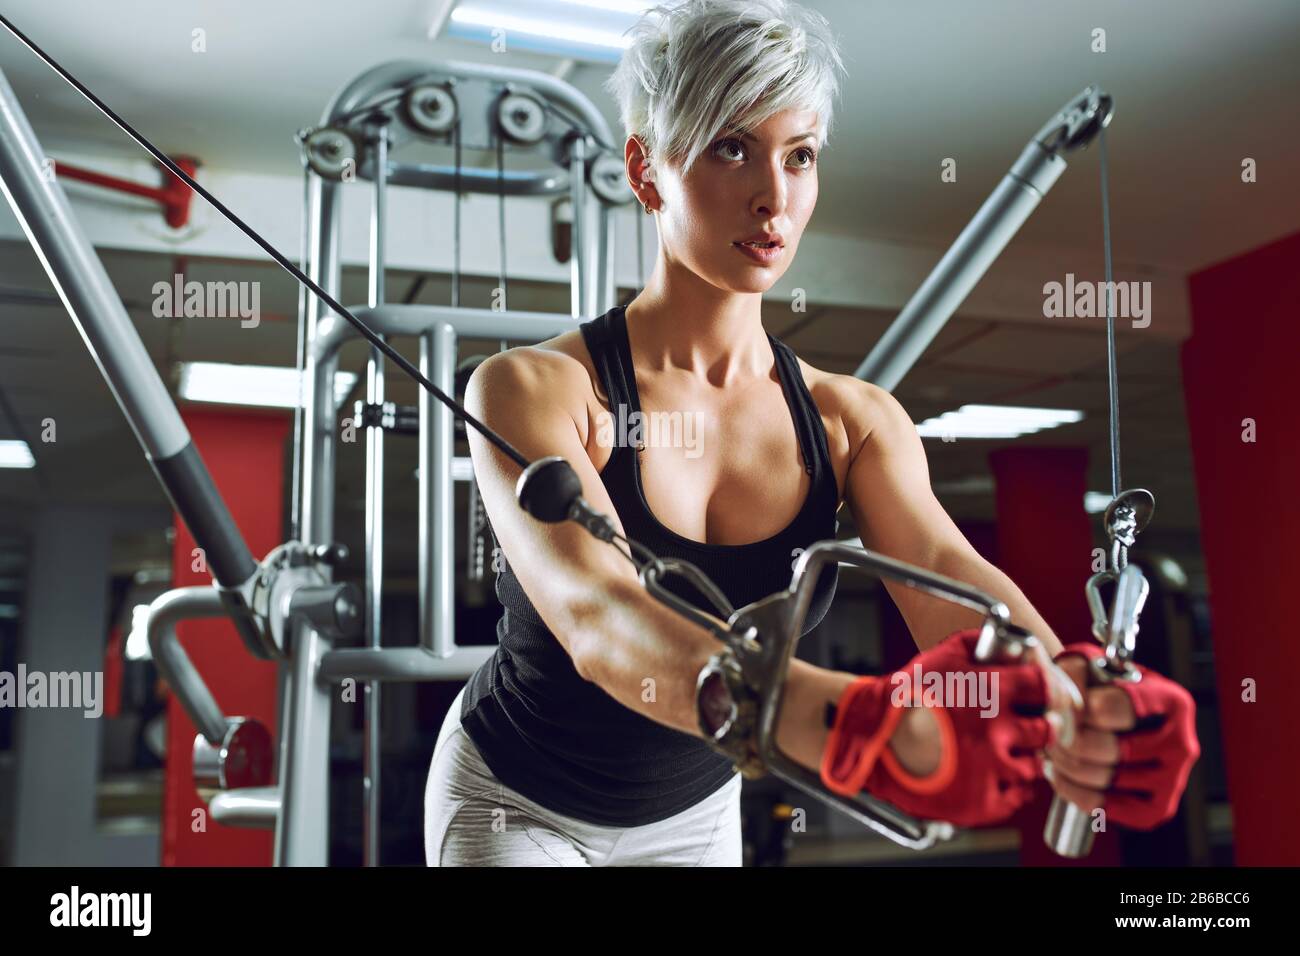 Conviction focused determined passionate confident powerful eyes stare intense athlete exercise trainer Stock Photo